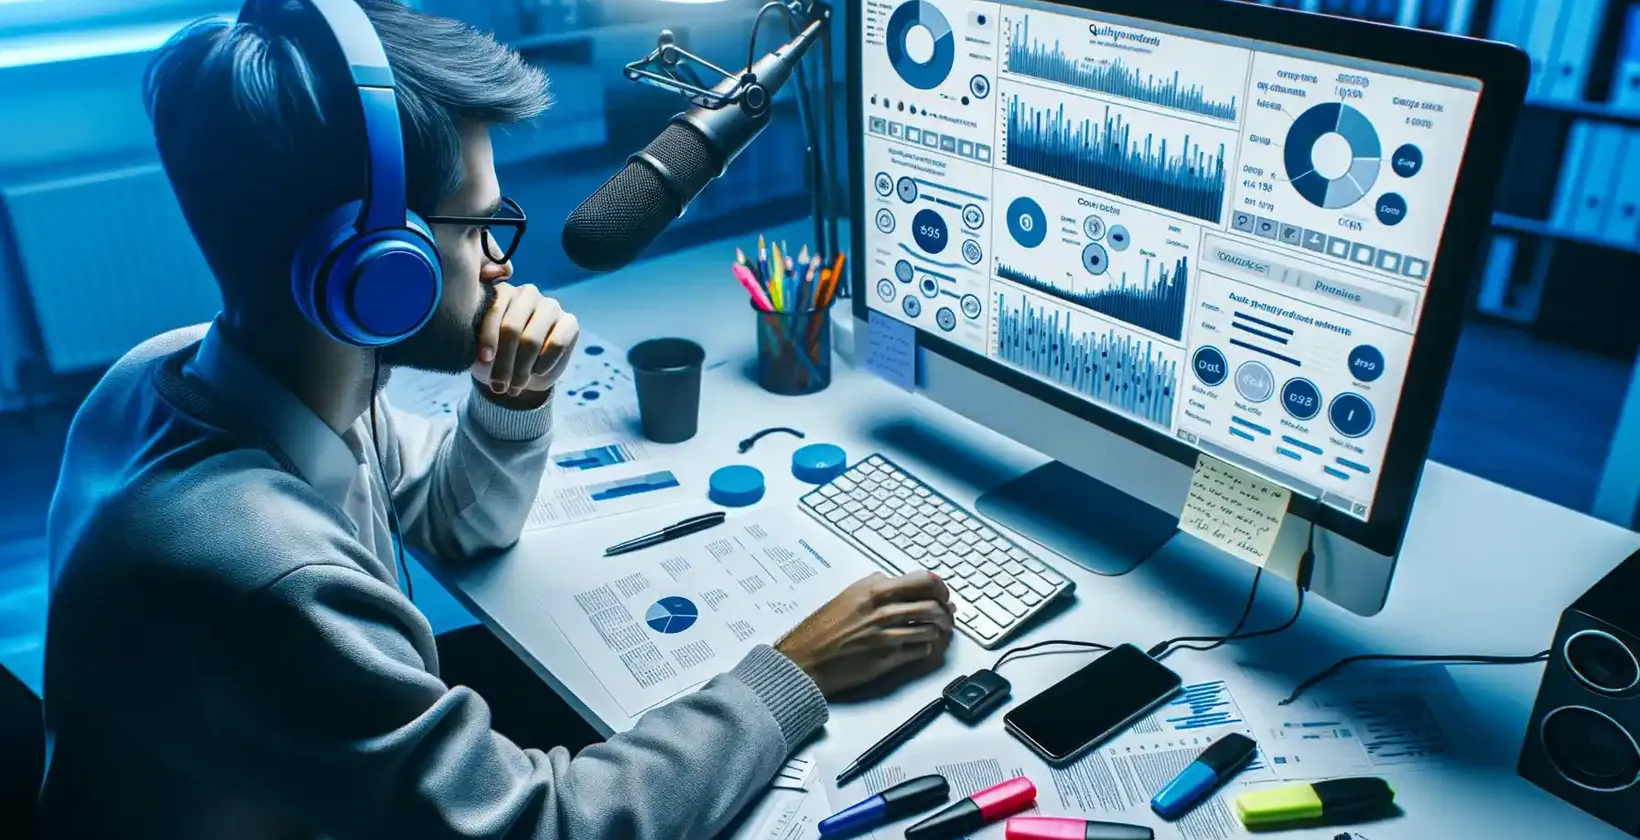 Academic transcription service depicted by a professional with headphones, mic, and a holographic interface on a laptop